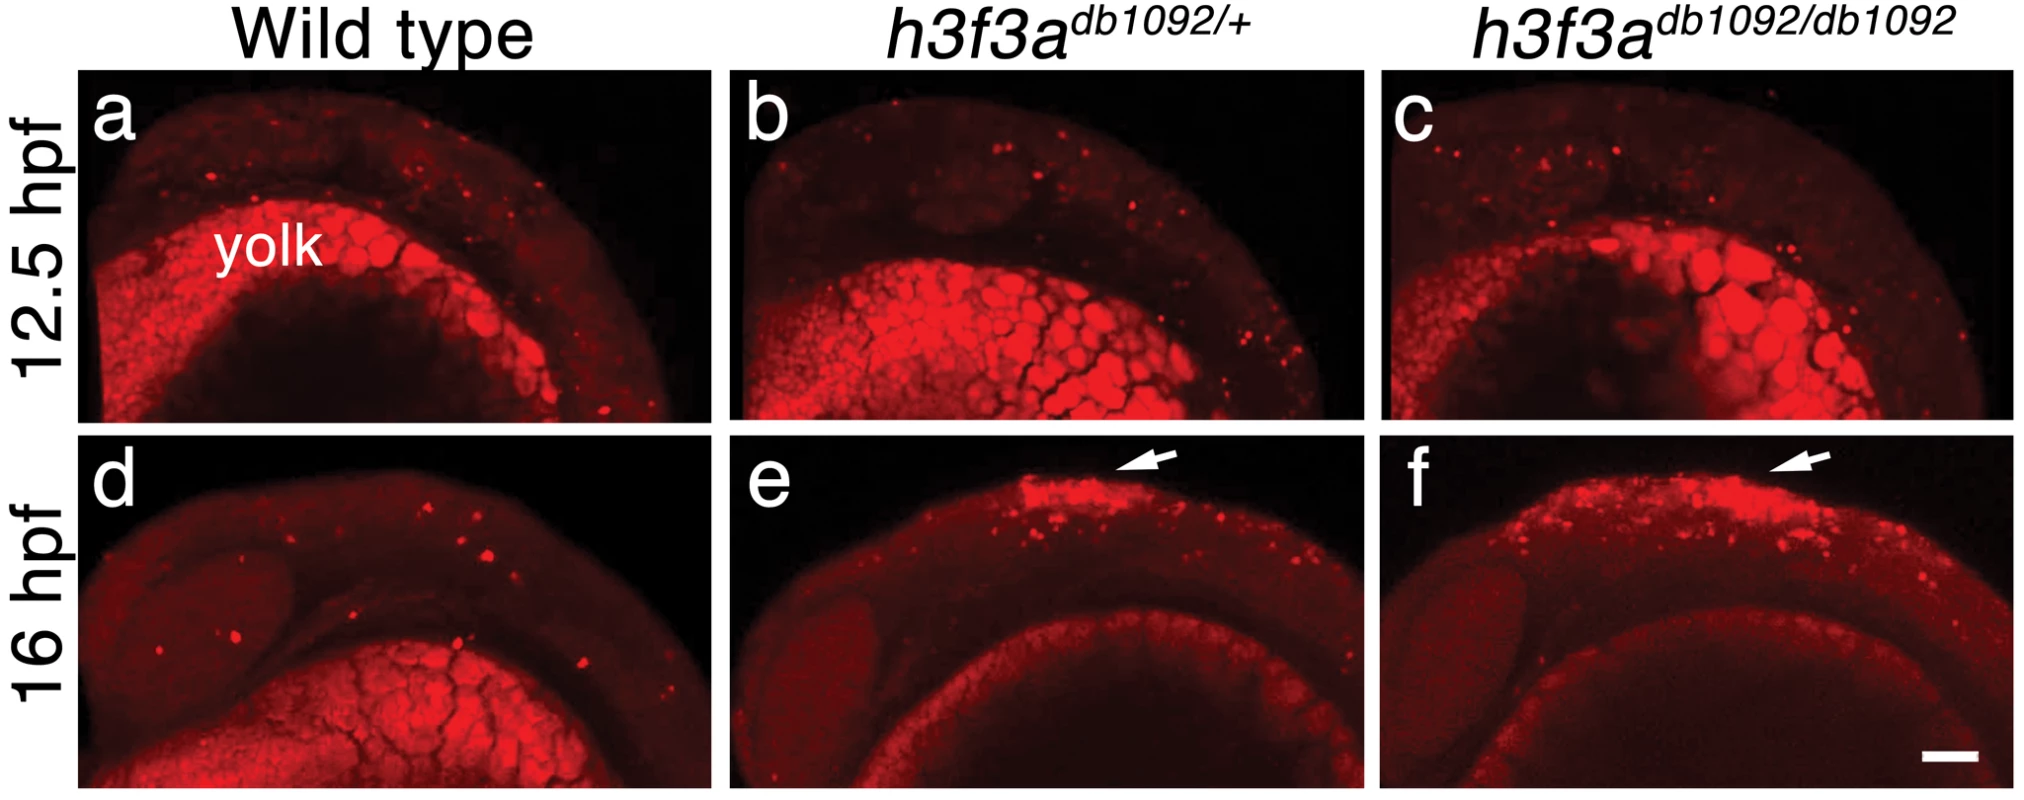 Cell death in <i>h3f3a<sup>db1092</sup></i> embryos.